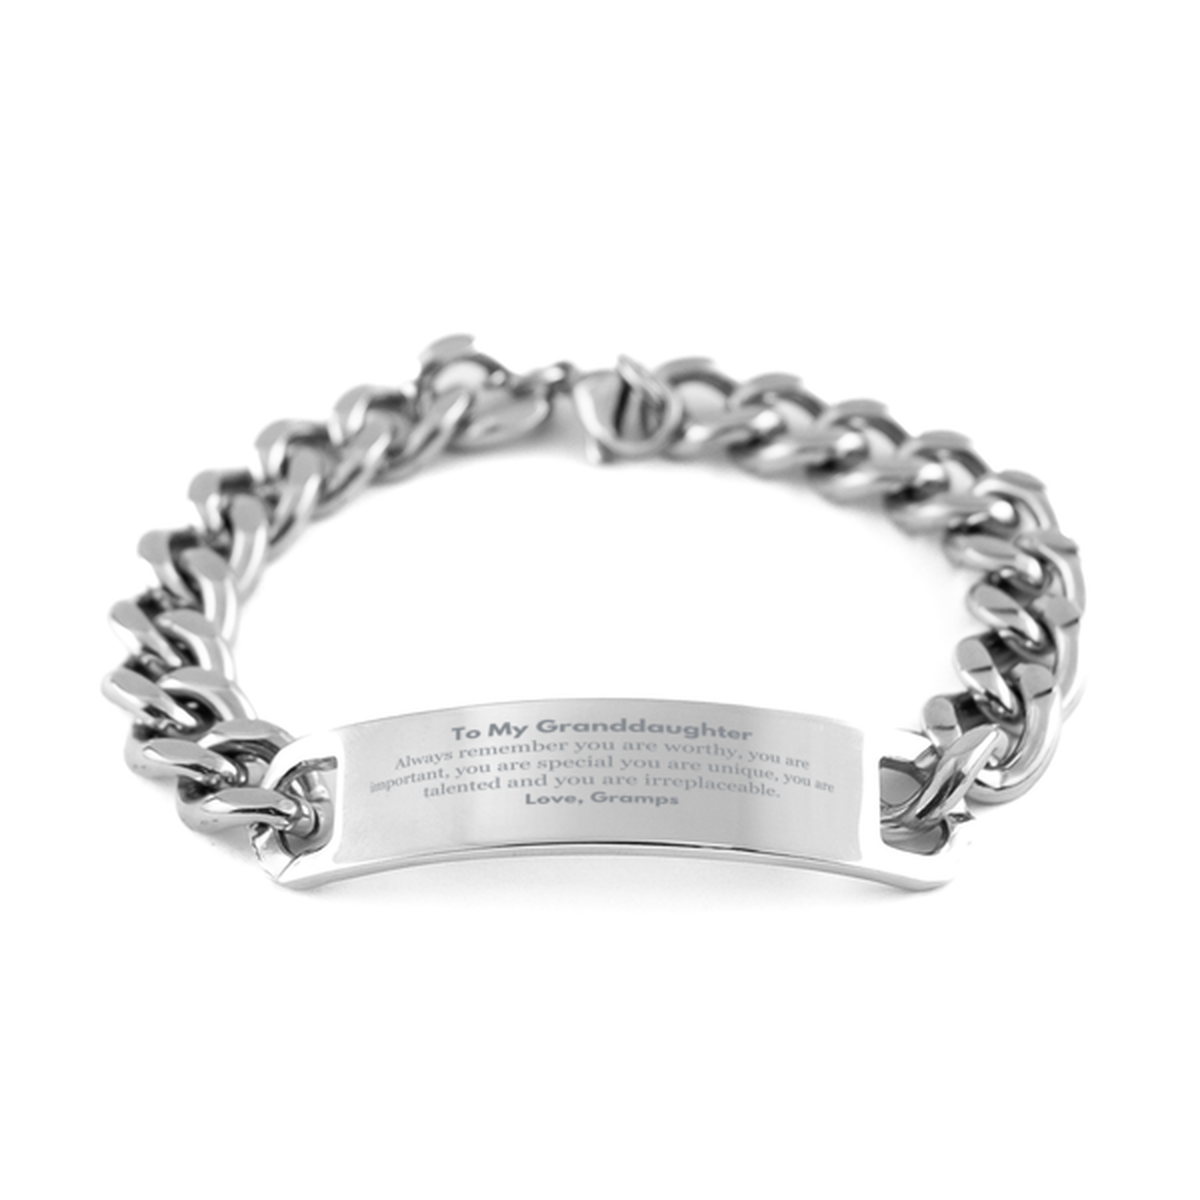 Granddaughter Birthday Gifts from Gramps, Inspirational Cuban Chain Stainless Steel Bracelet for Granddaughter Christmas Graduation Gifts for Granddaughter Always remember you are worthy, you are important. Love, Gramps